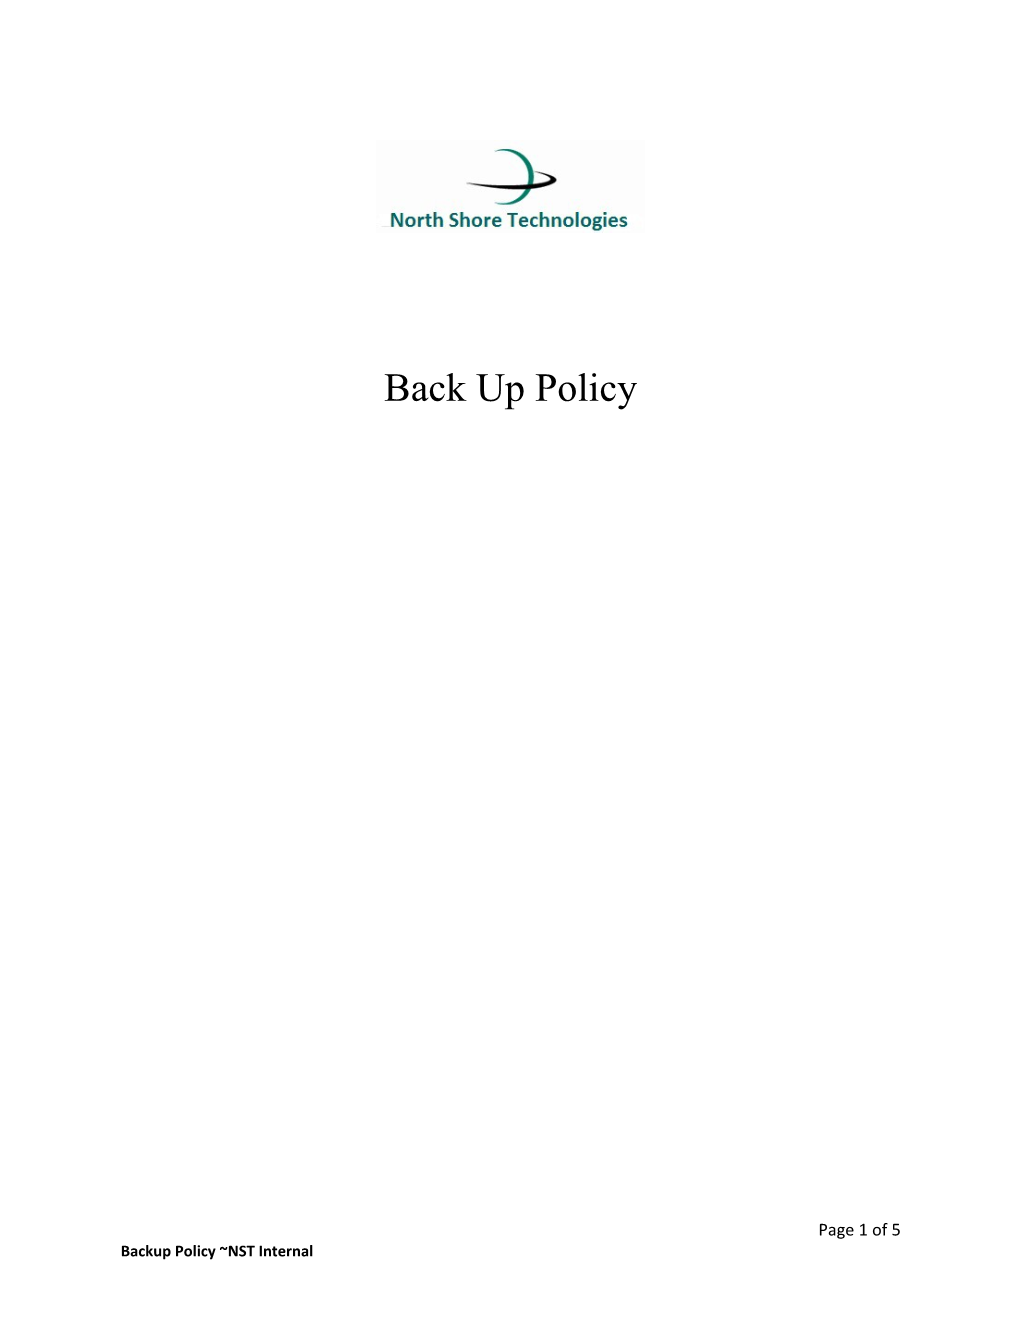 Back up Policy